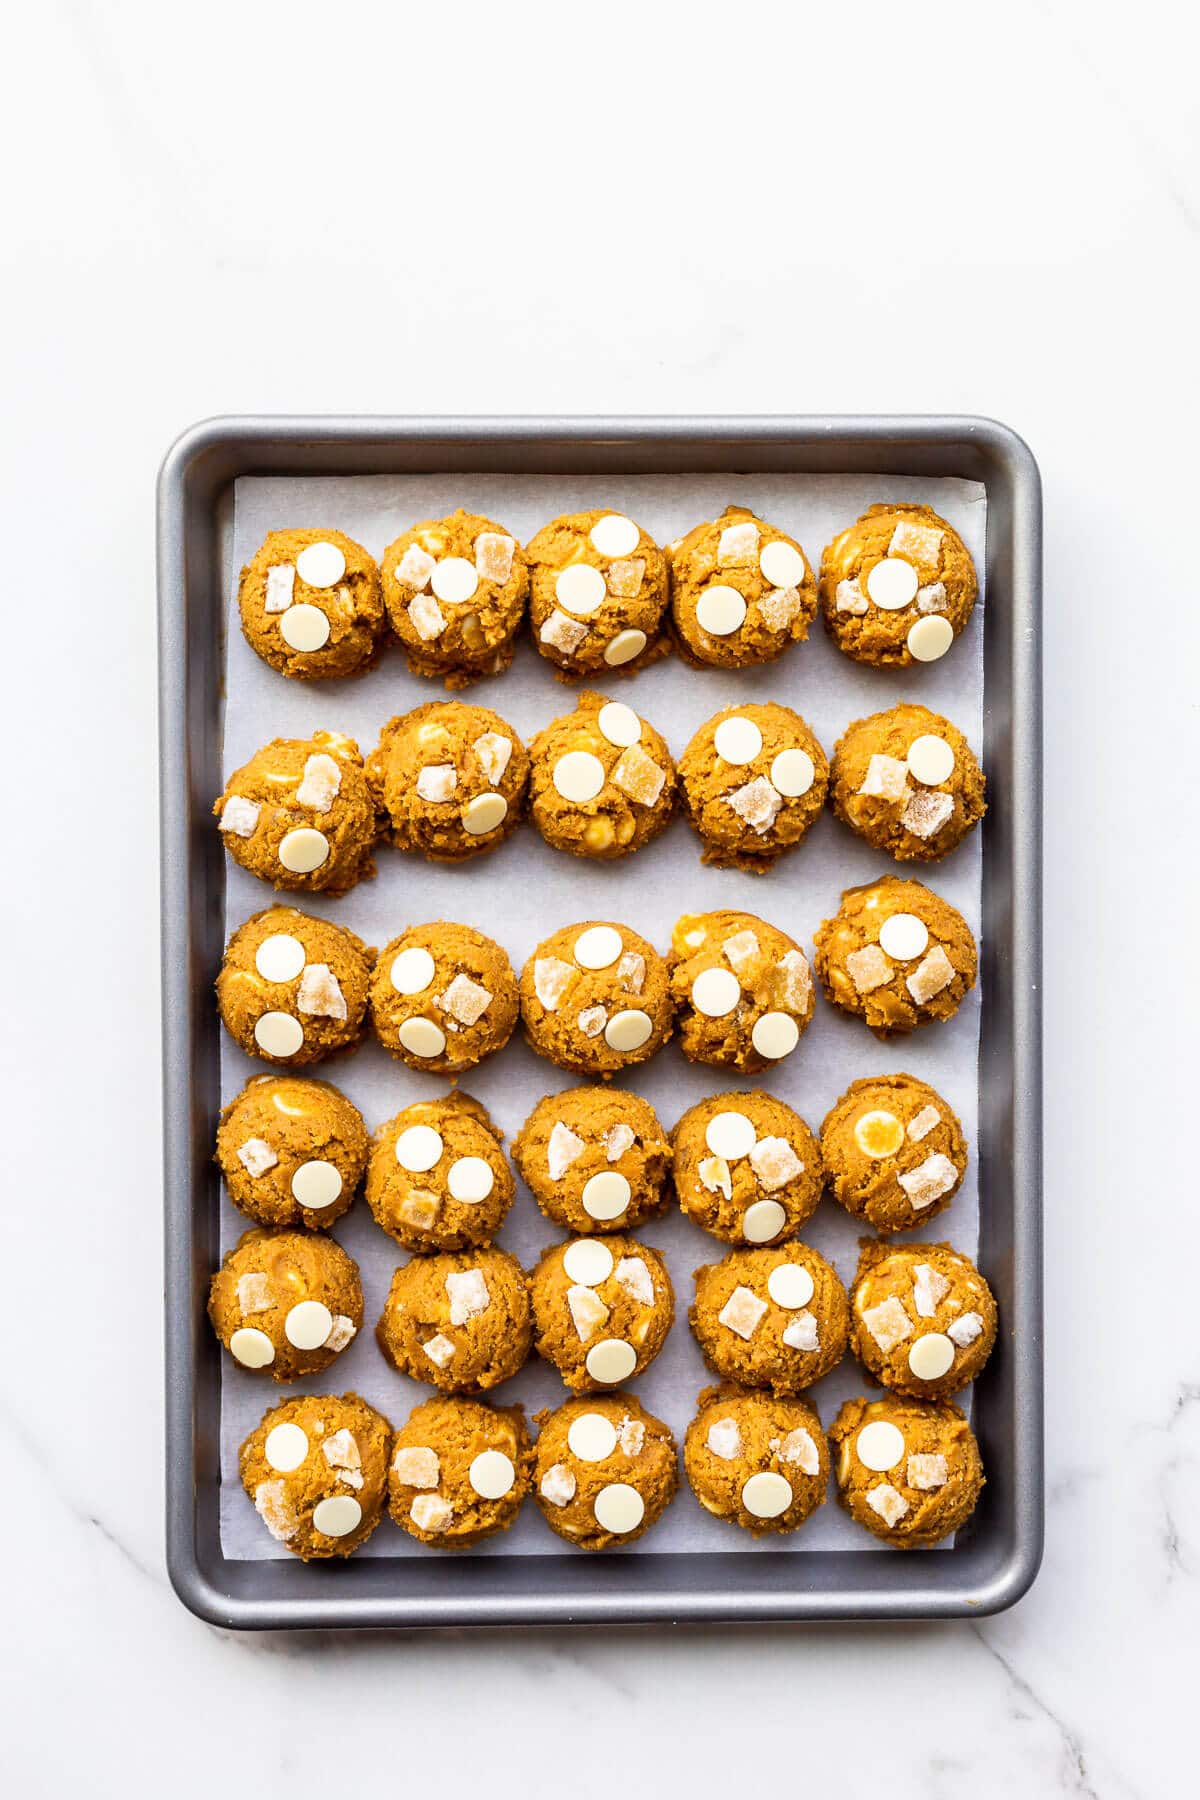 Scoops of ginger cookie dough with white chocolate chips before baking on a parchment-lined sheet pan.